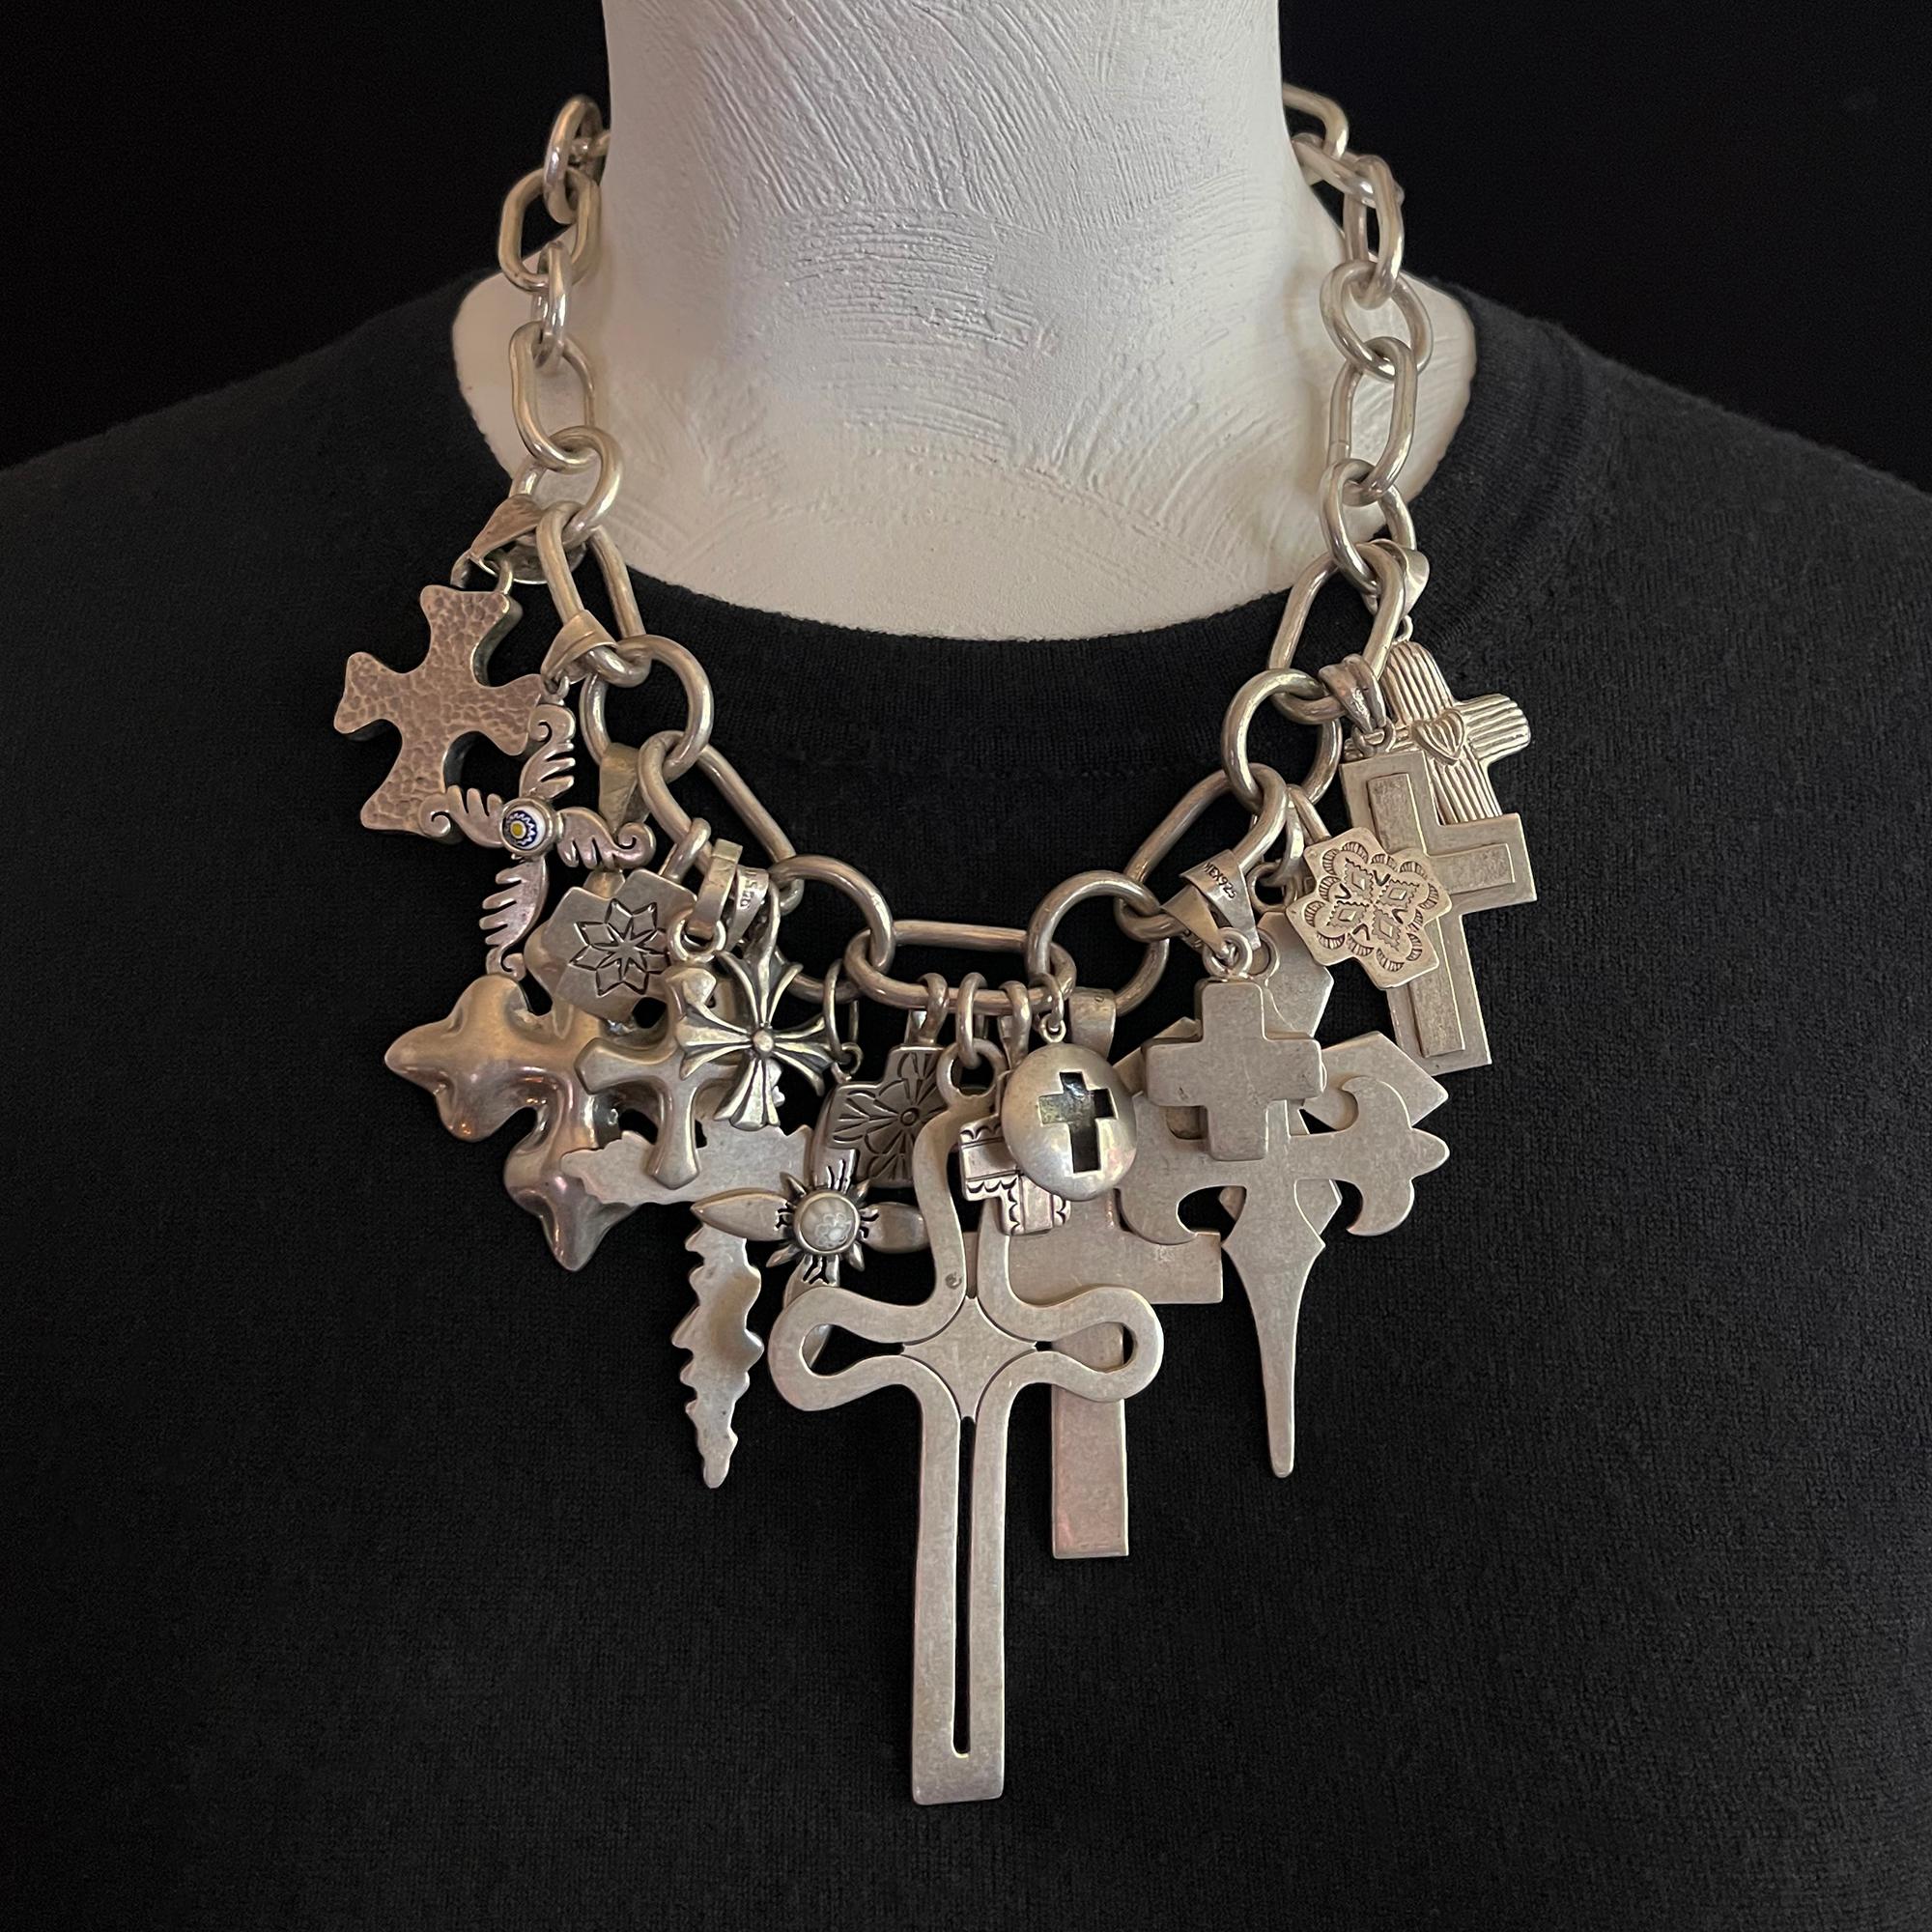 20th century Silver cross necklace by Coreen Cordova of Que Milagros

A dramatic charm necklace designed by Coreen Cordova of Que Milagros containing nineteen interpretations of a cross hanging on thick chainlink, which is finished with a toggle